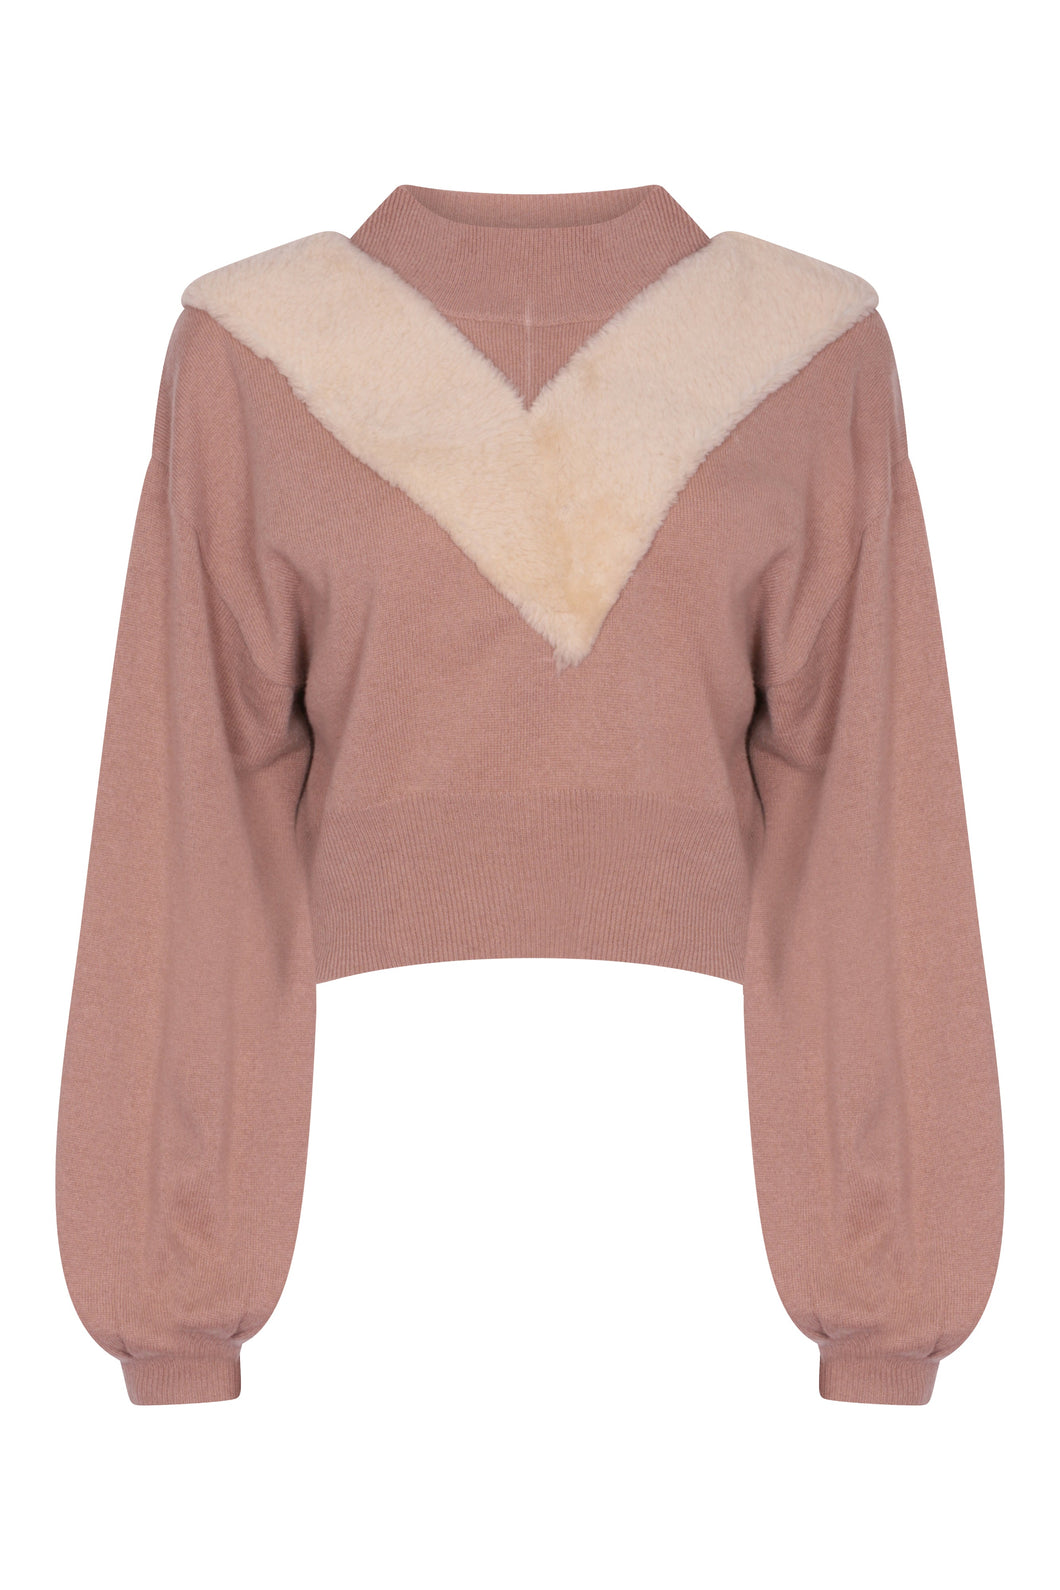 Balloon Sleeve Sweater with Shearling Detail in Pecan